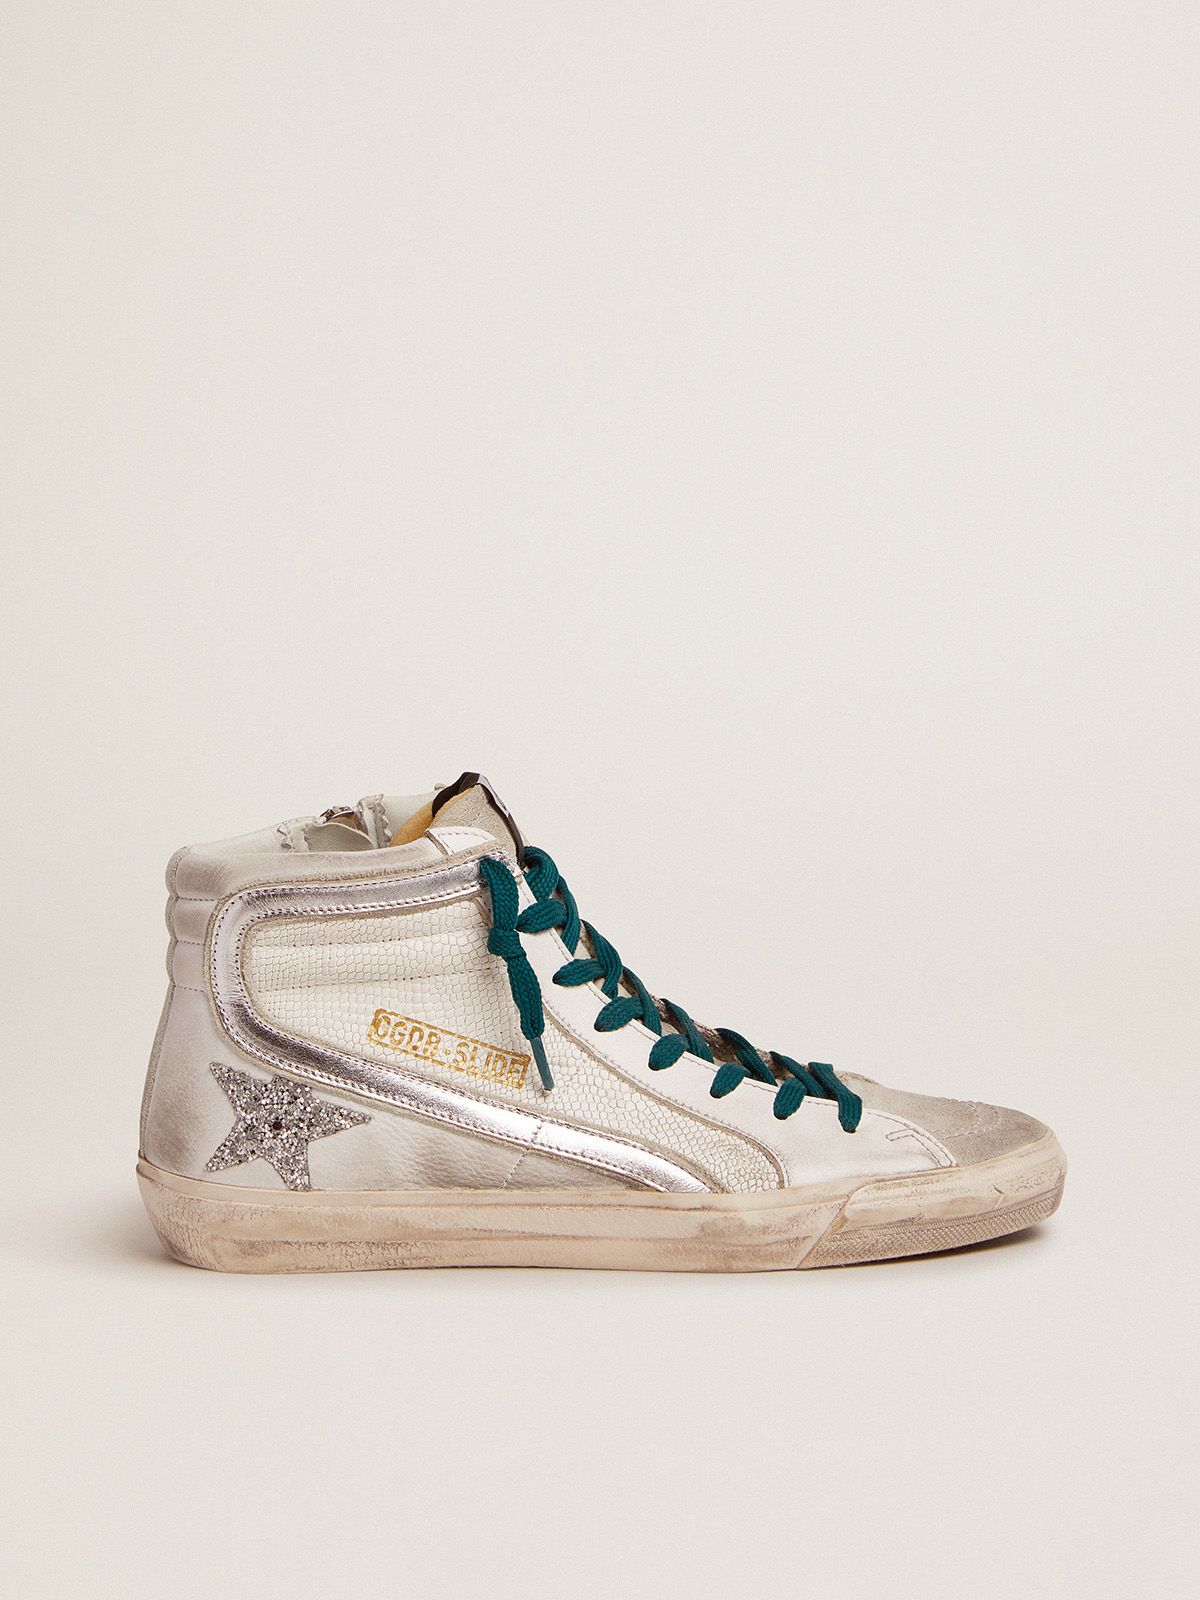 Slide sneakers with snake-print leather upper and silver glitter star | 